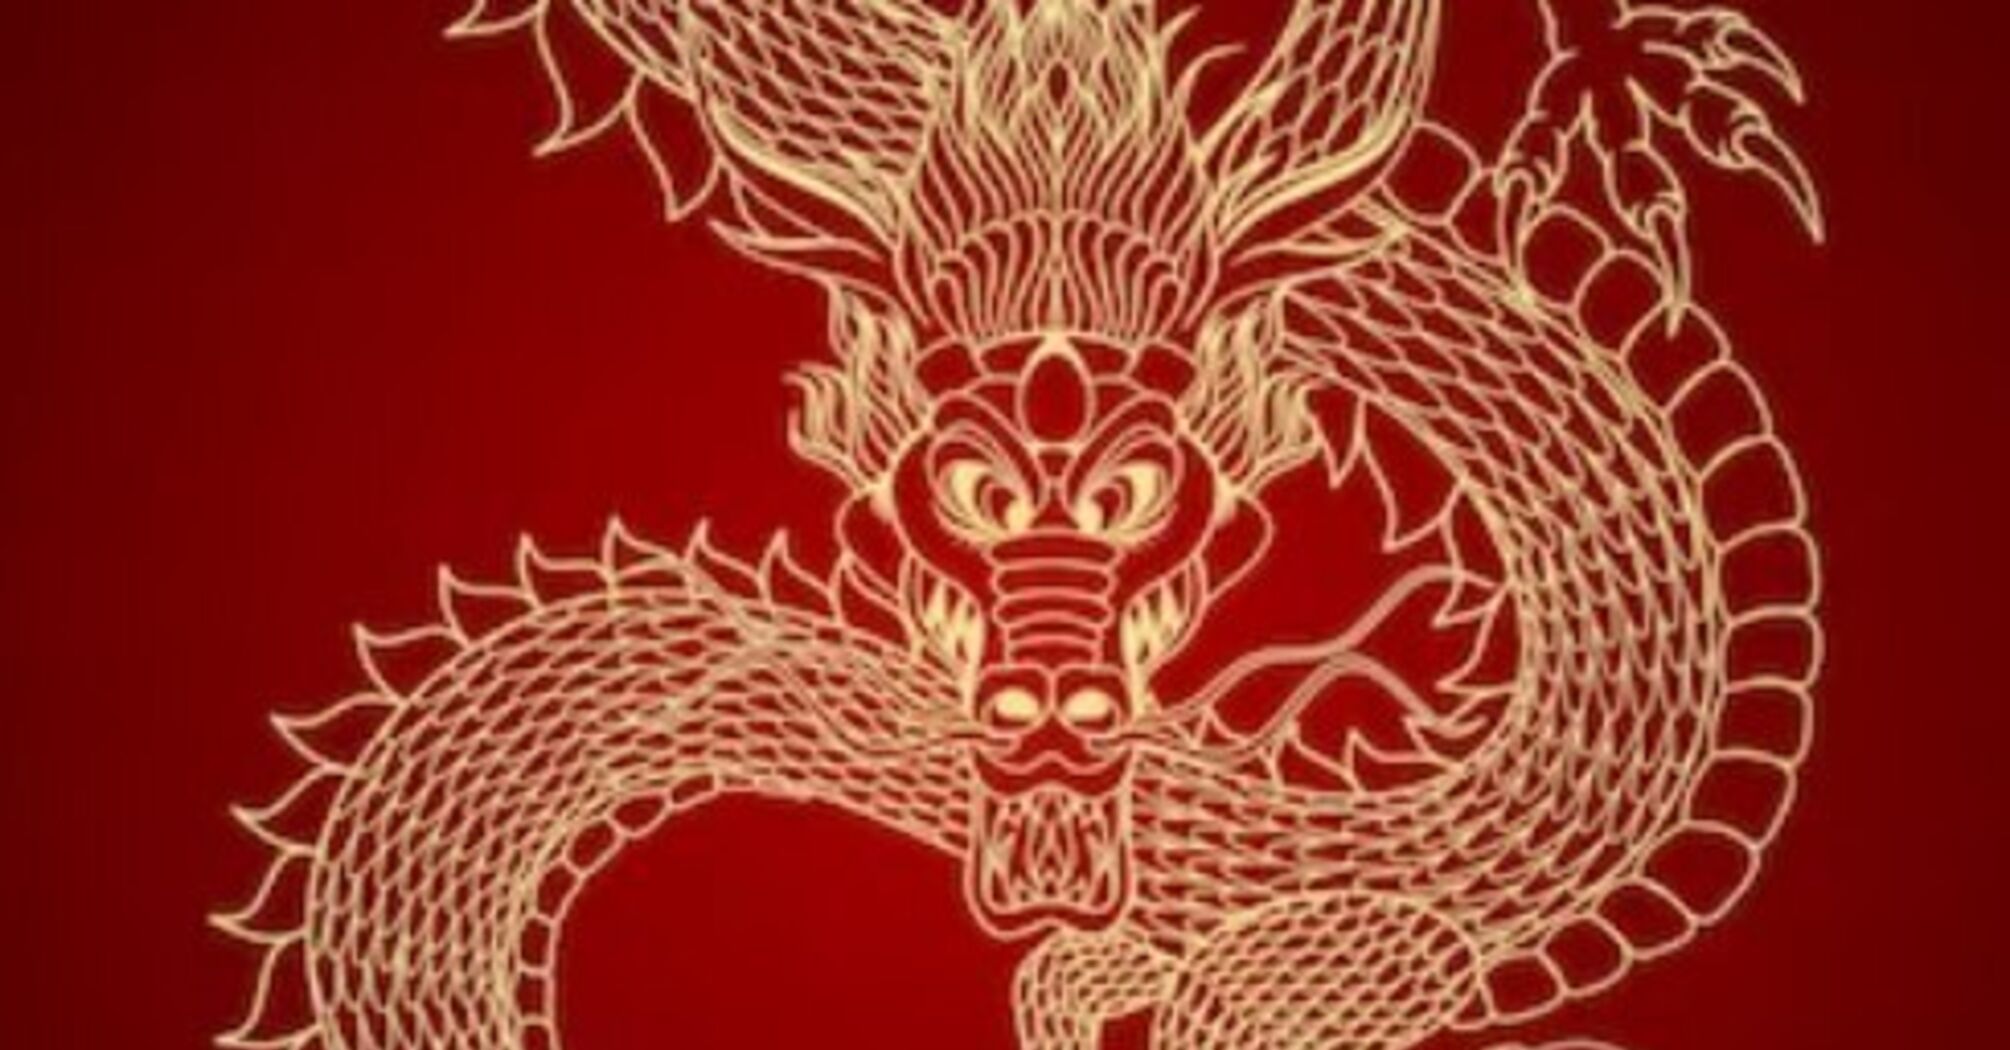 Beware of possible setbacks: Chinese horoscope for March 13